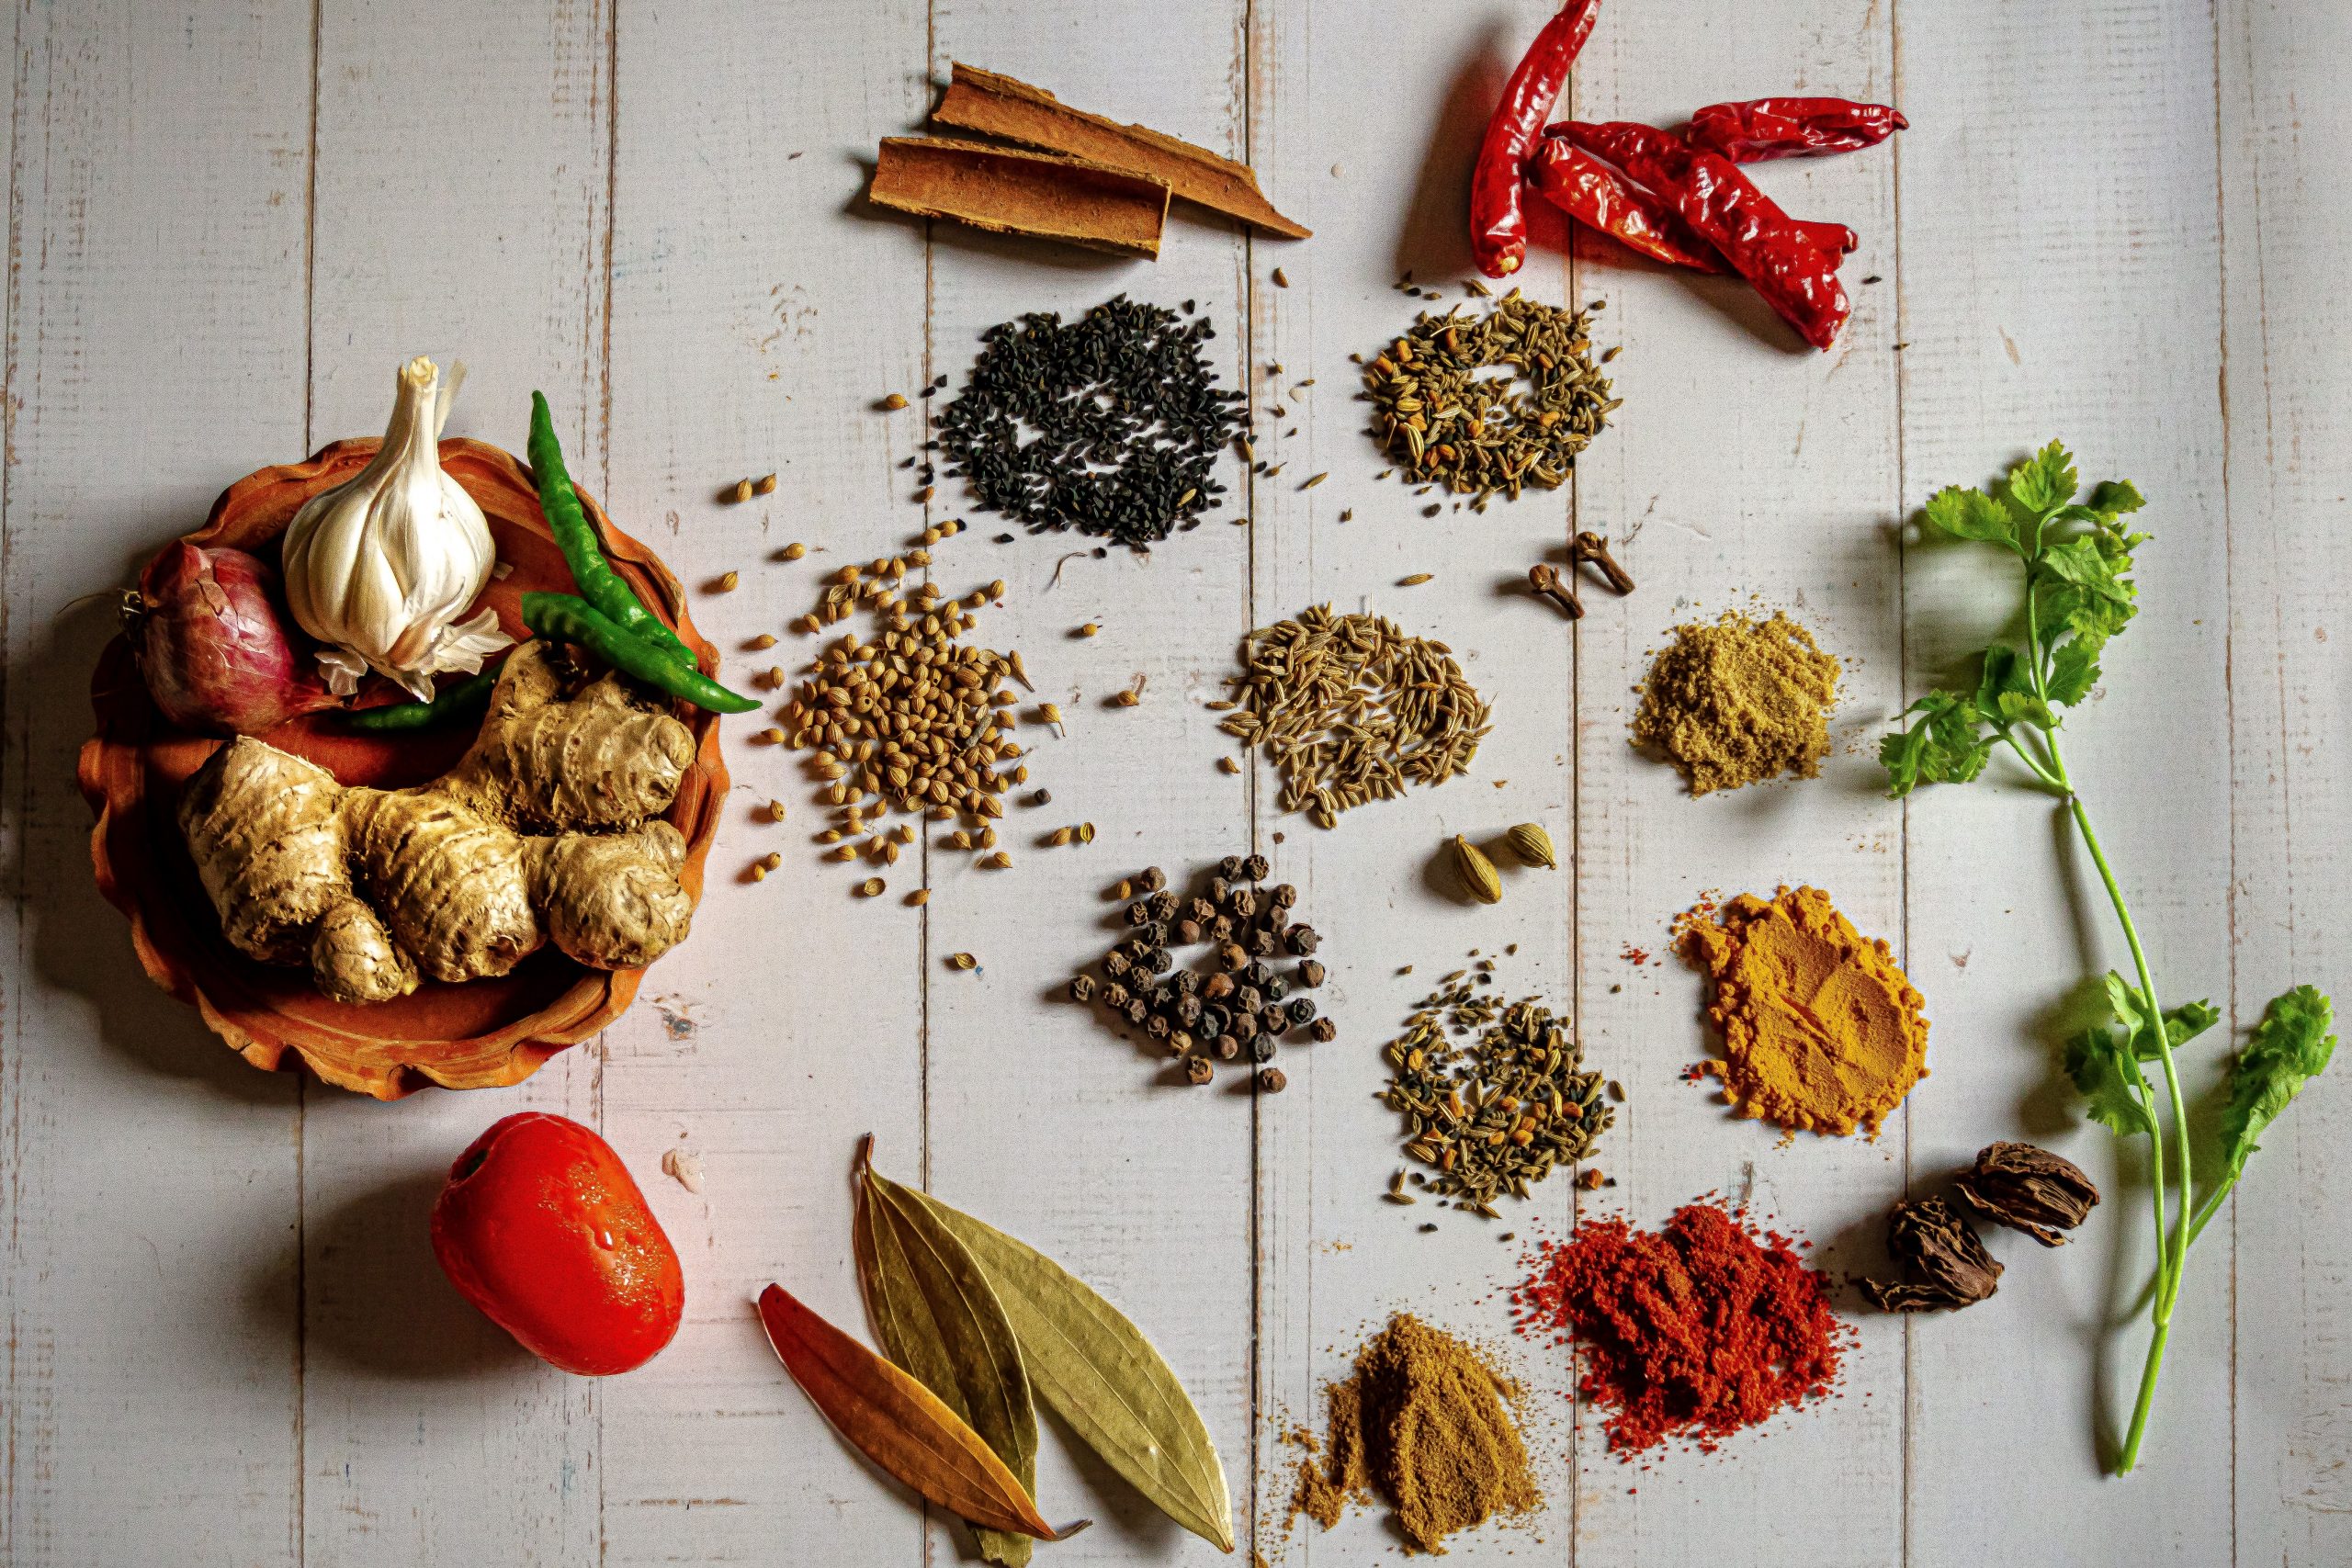 Kitchen spice not looking nice? How to check if your spices have gone bad